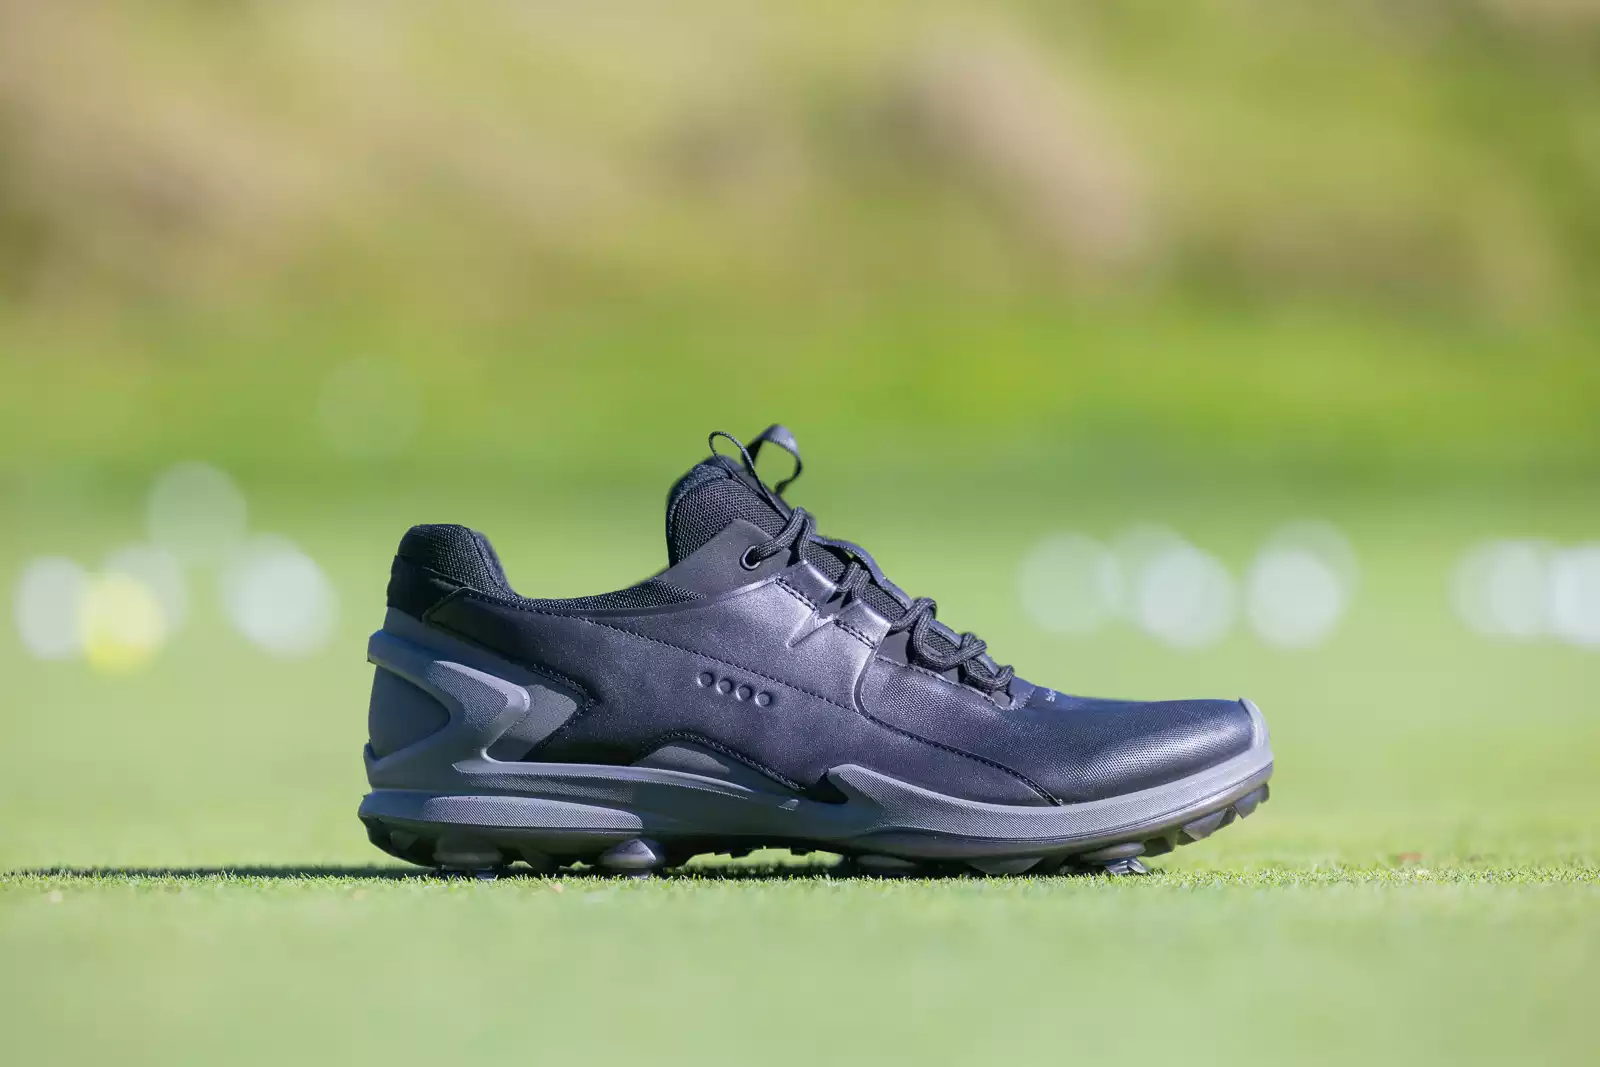 Ecco Biom G5 Review: Is it Worth Buying a Spiked Ecco Shoe?